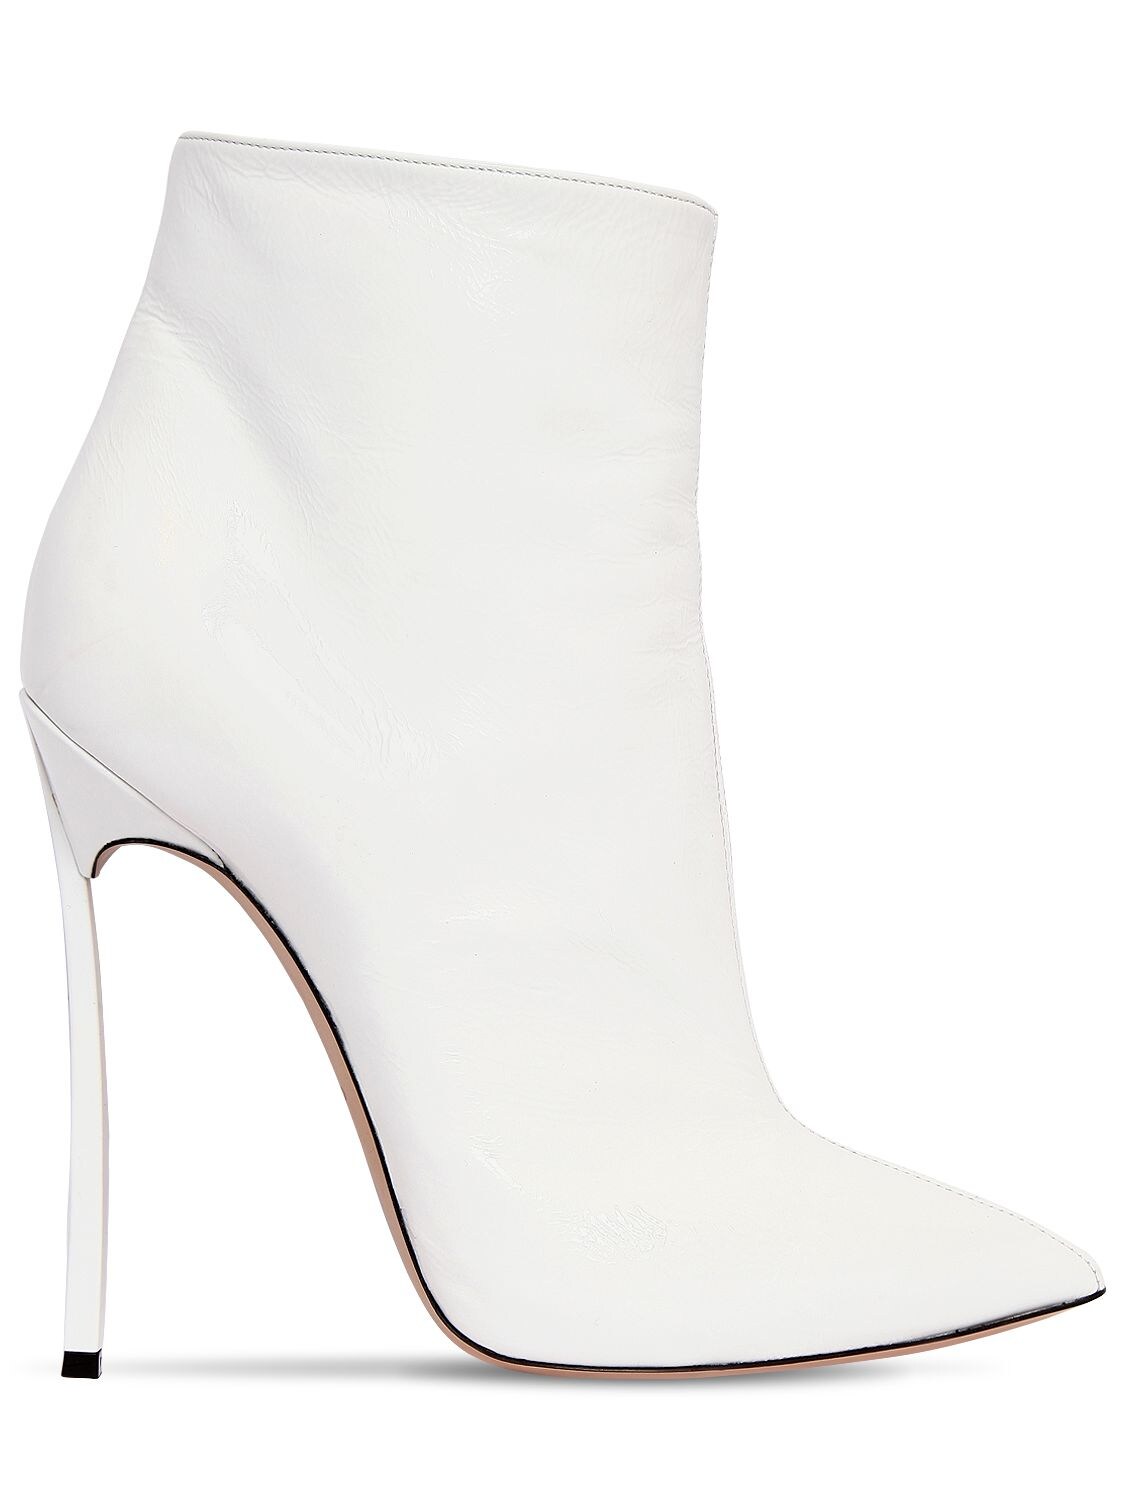 Casadei 120mm Blade Patent Leather Ankle Boots In Optic White